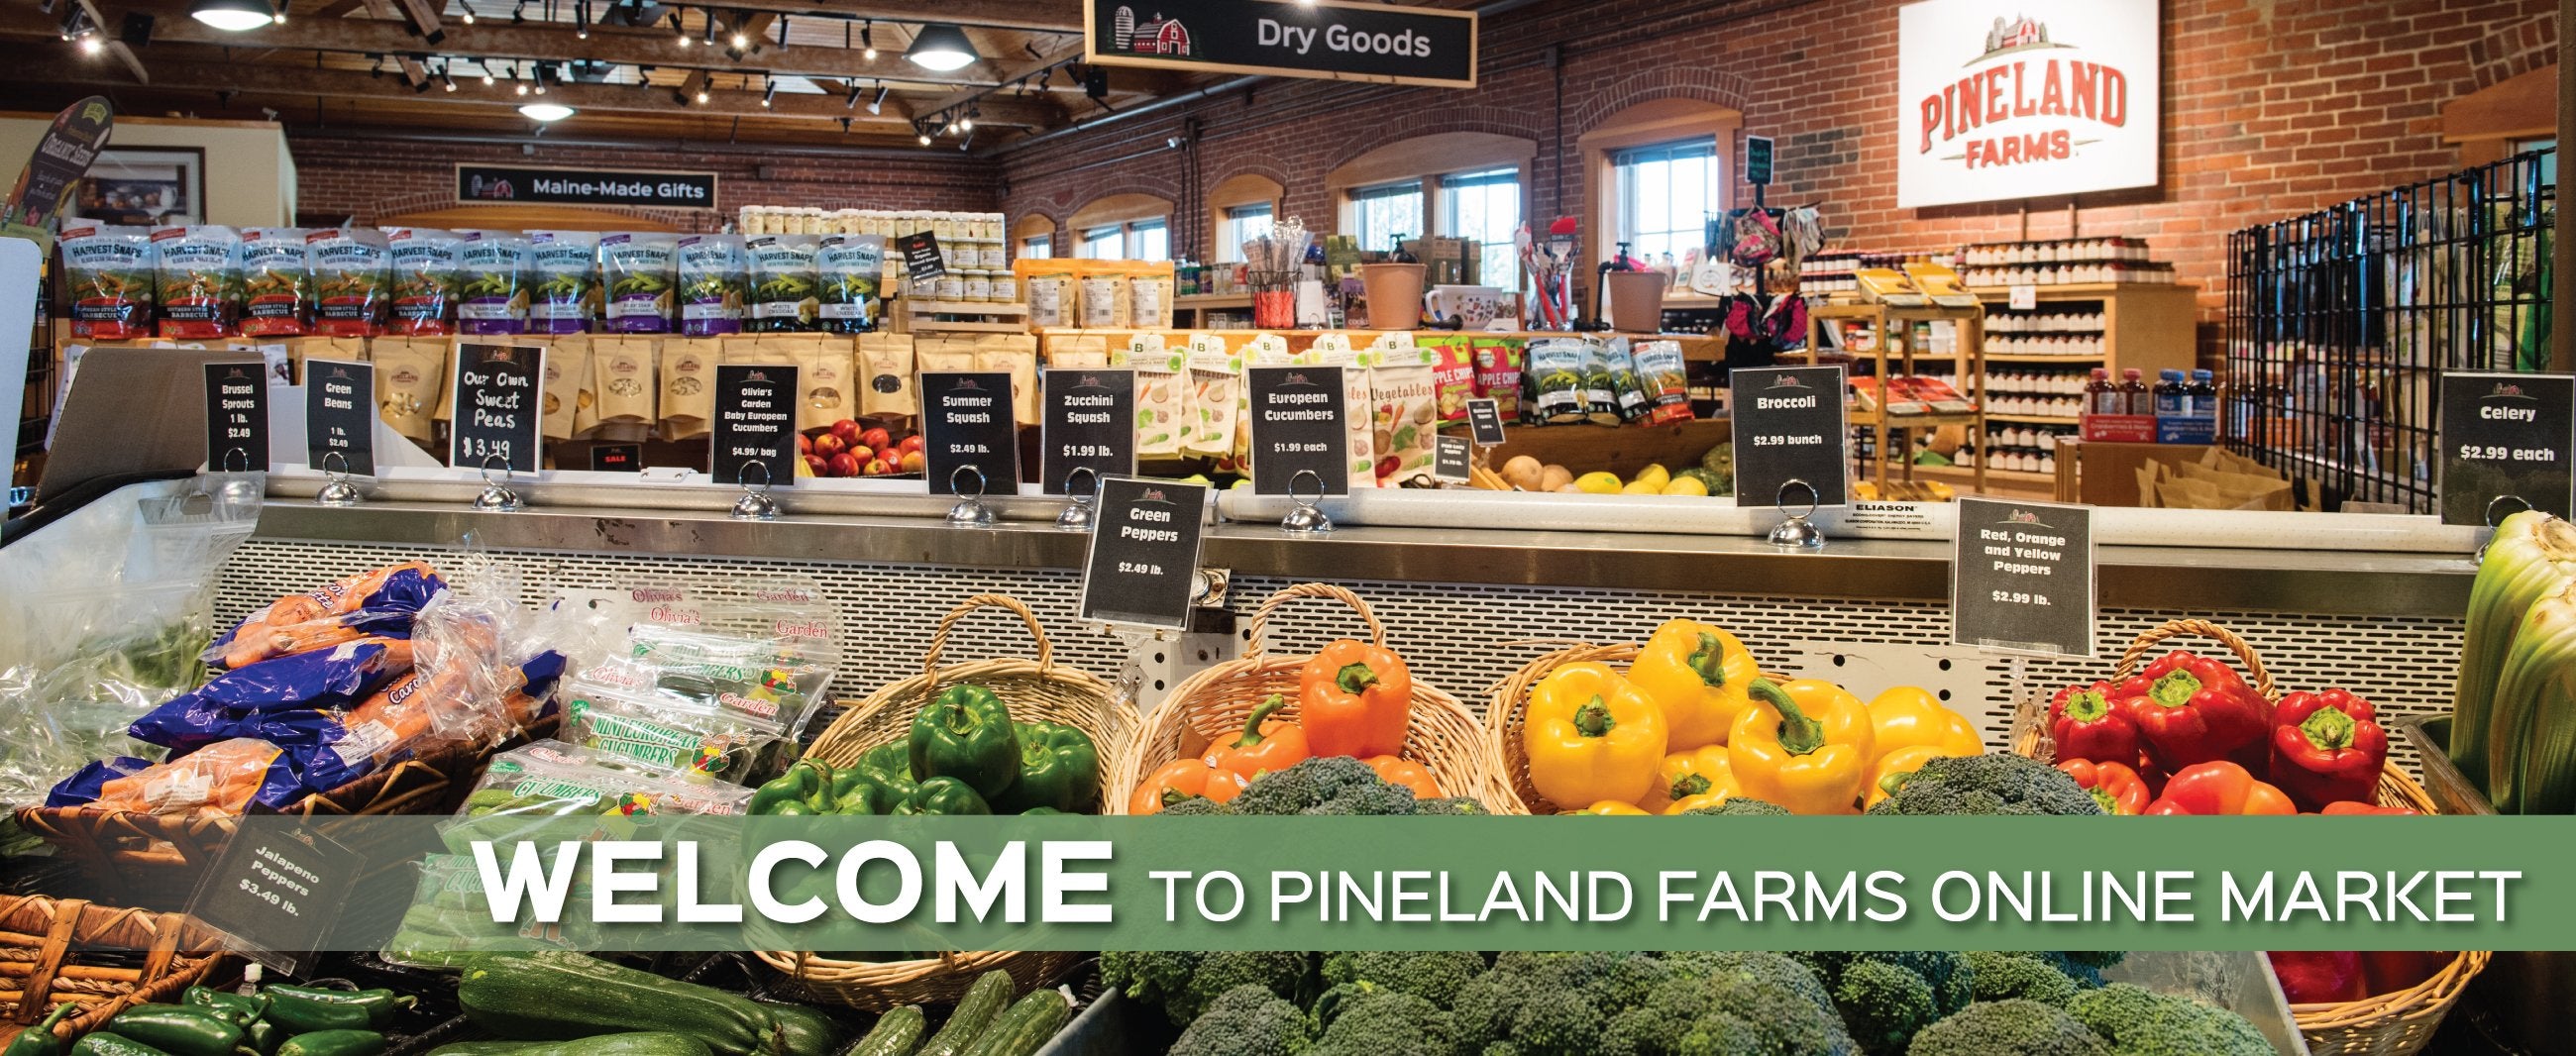 Welcome to Pineland Farms Online Market